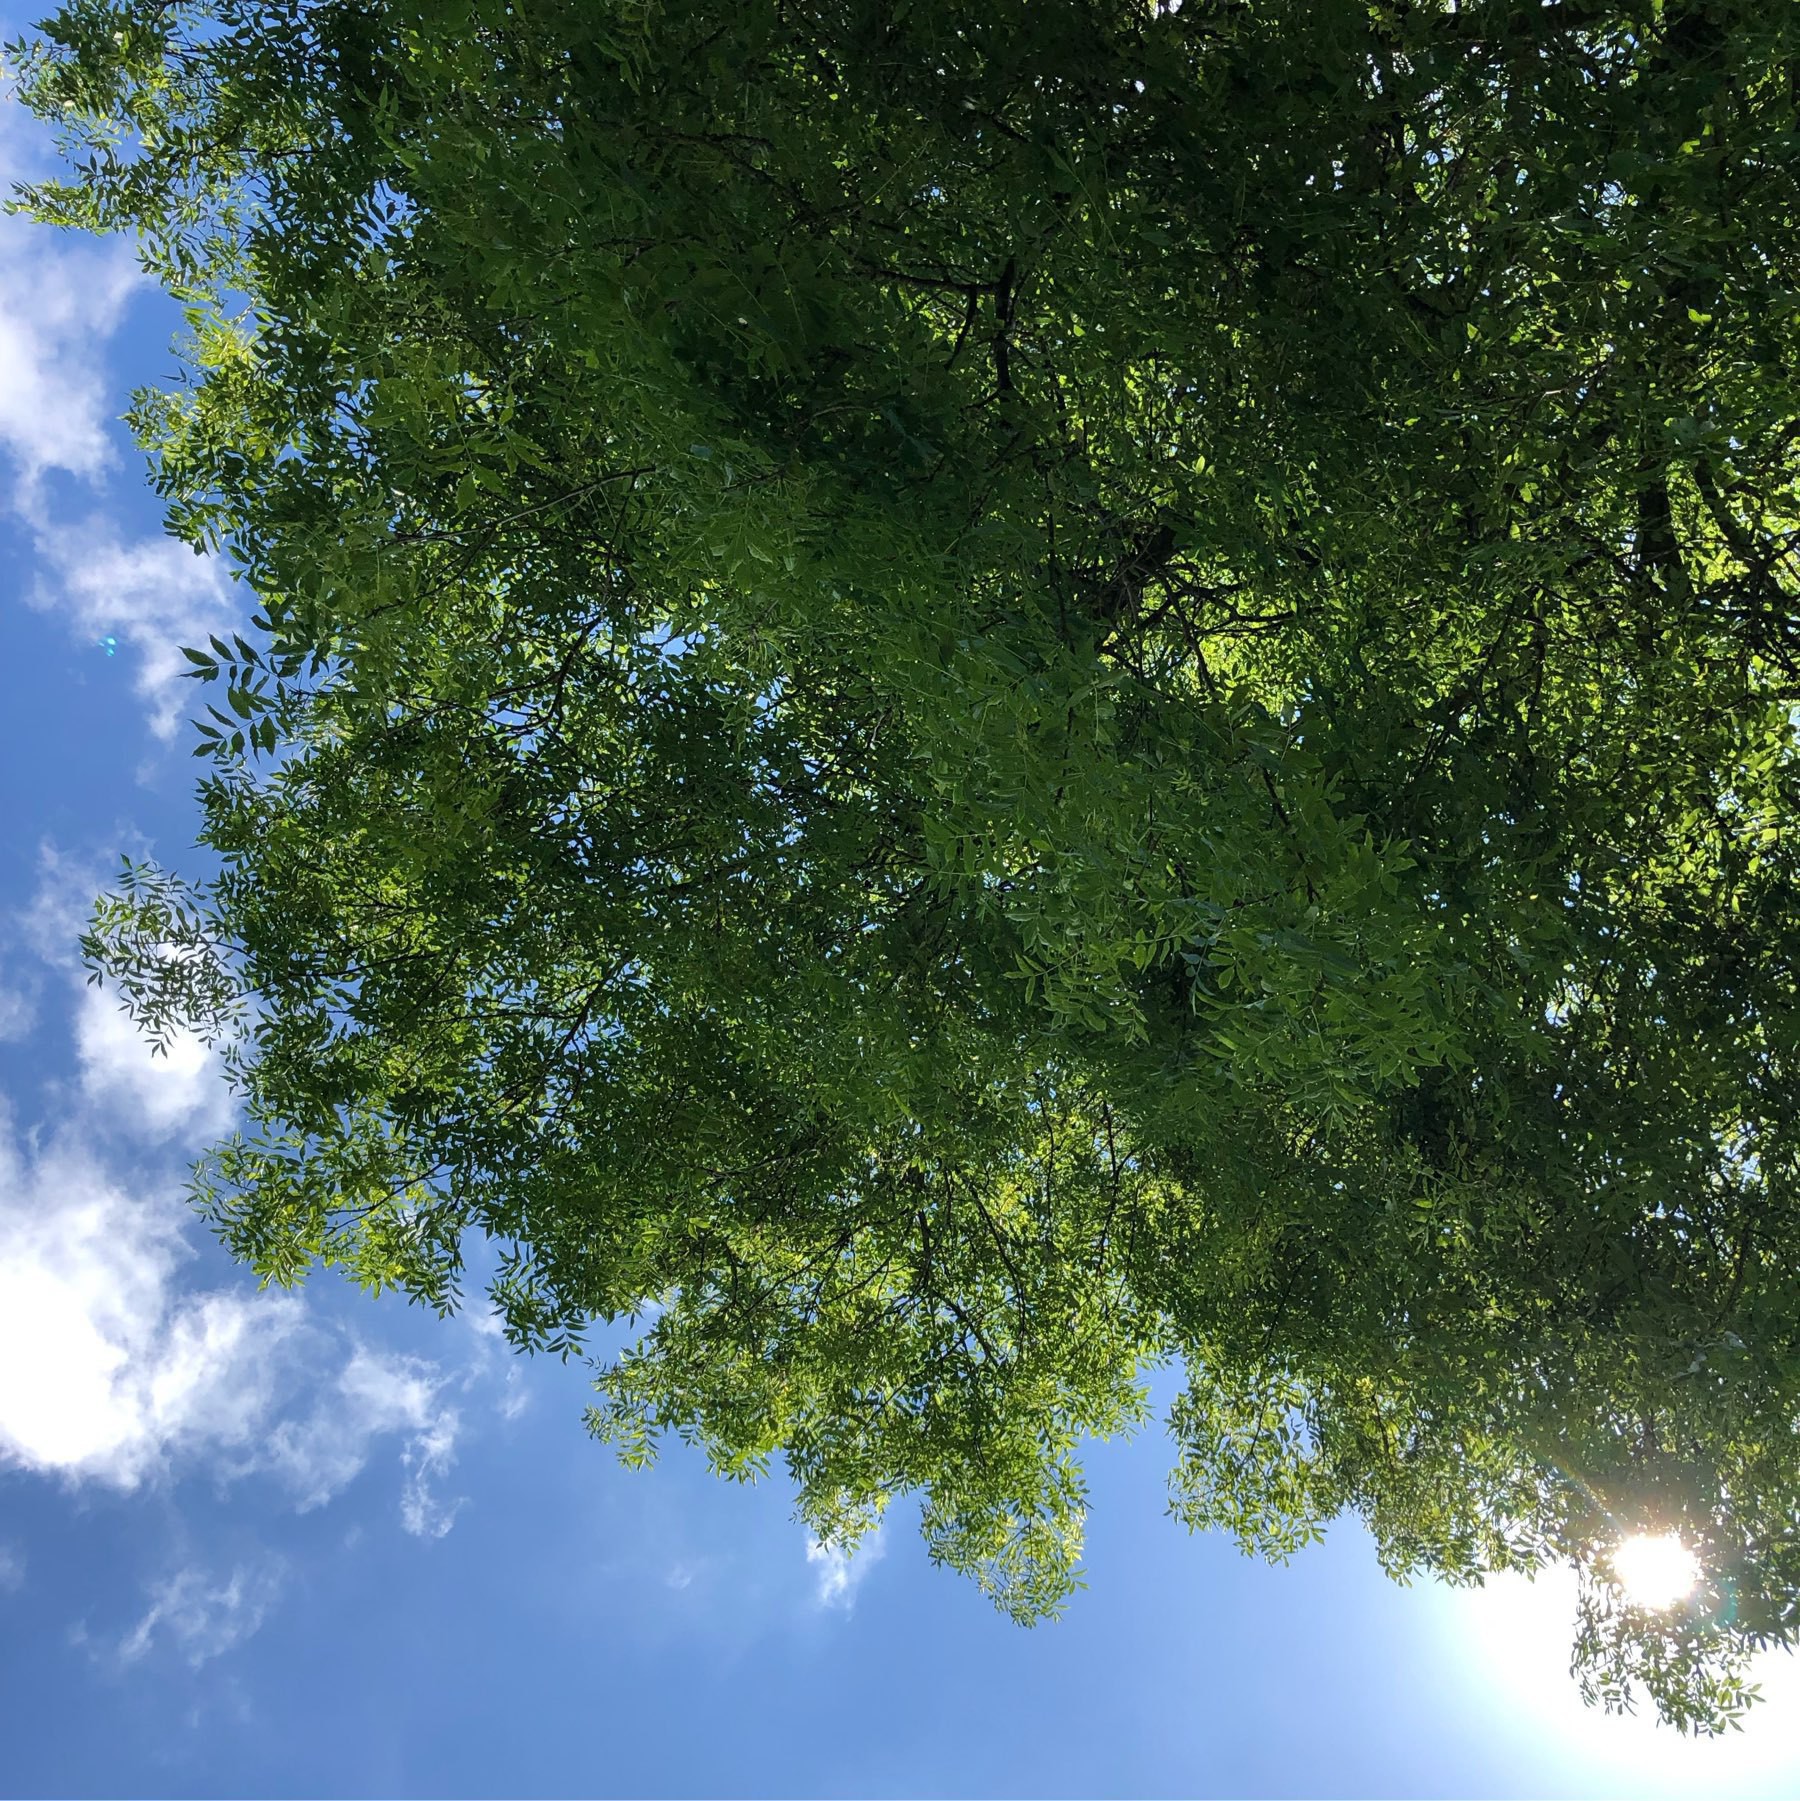 Picture of the sky and the tree above me in the park.